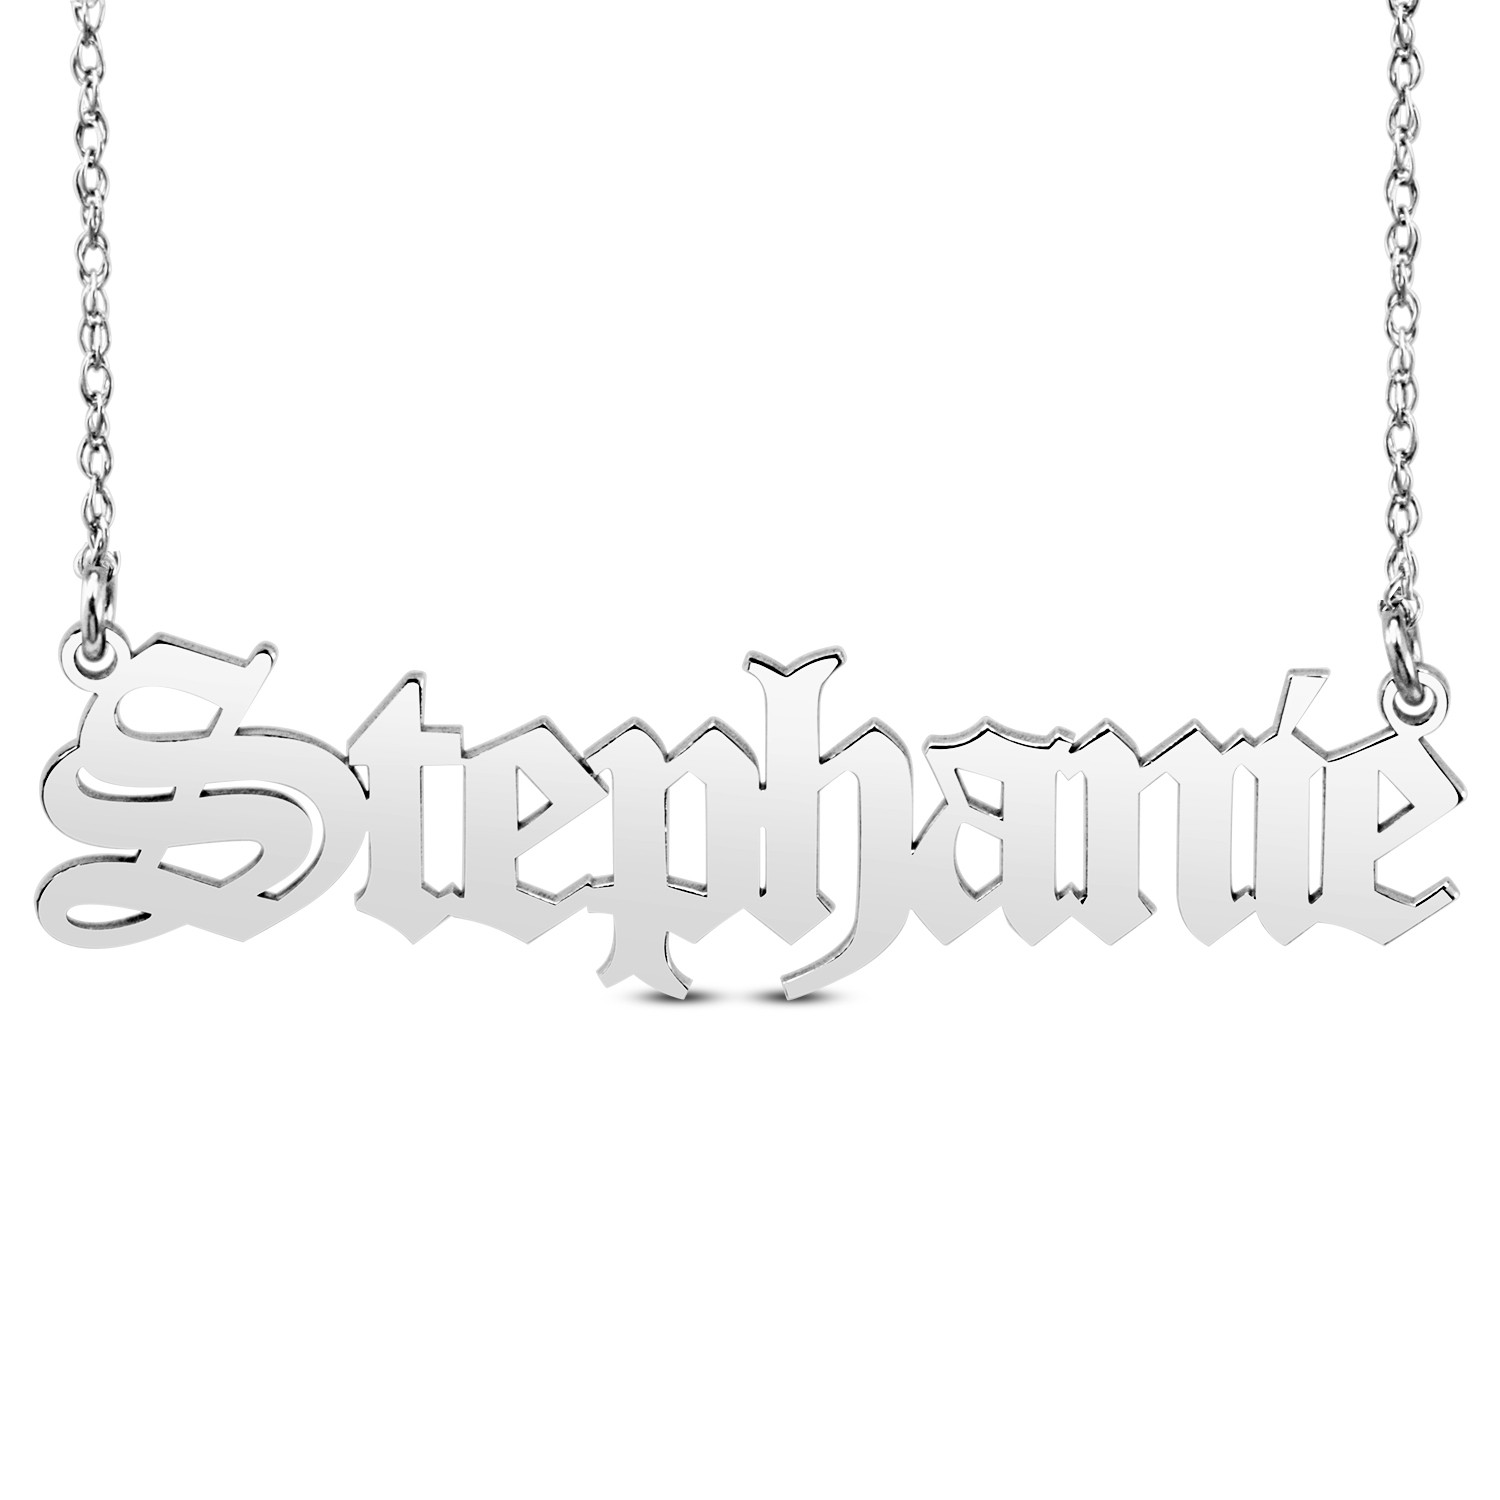 HI Polish Name Pers Necklace - 9 letter max 1 Uppercase letter (Example: Stephanie S=9.95mm x 1.76" e=7.22mm)